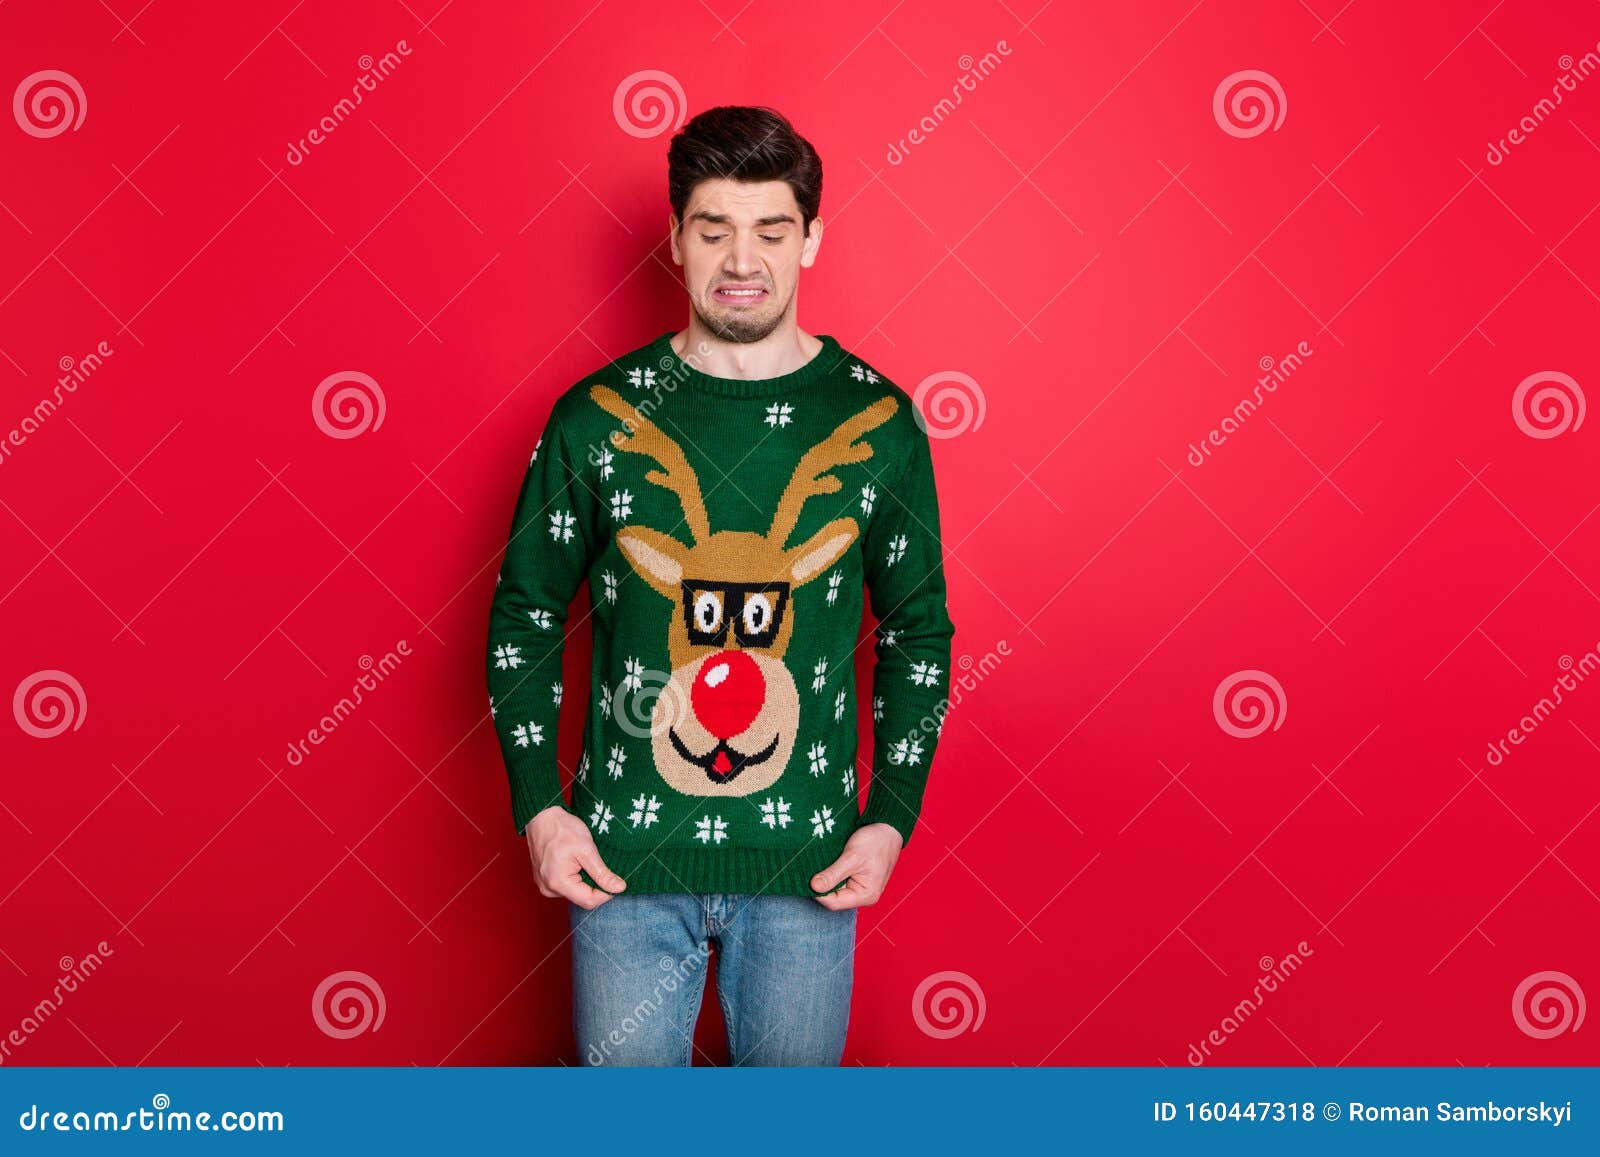 What a Disgust. Portrait of Frustrated Man Look at His Funny Ugly Sweater  Dislike His Christmas Present Wear Denim Jeans Stock Photo - Image of male,  funny: 160447318